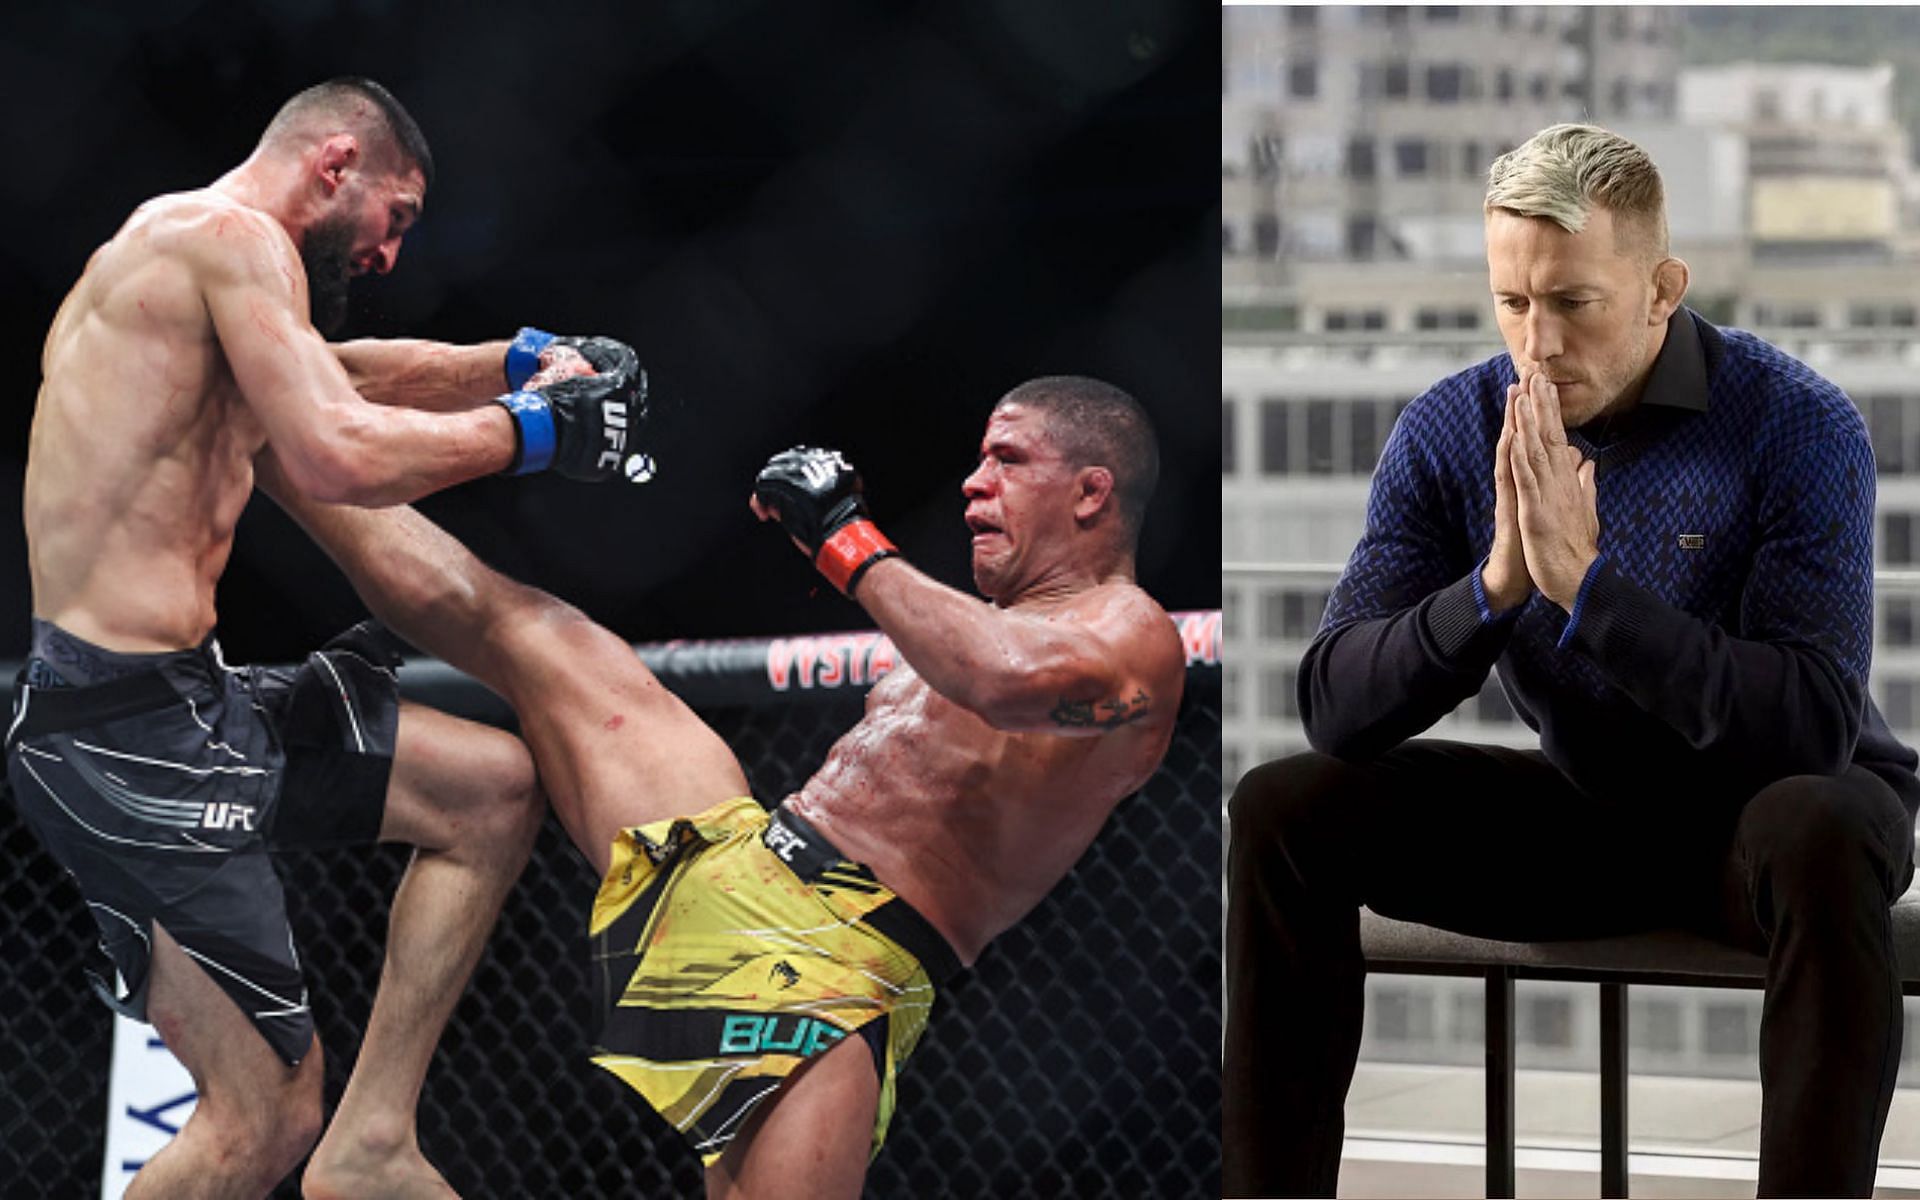 From left to right: Khamzat Chimaev, Gilbert Burns, and Georges St-Pierre